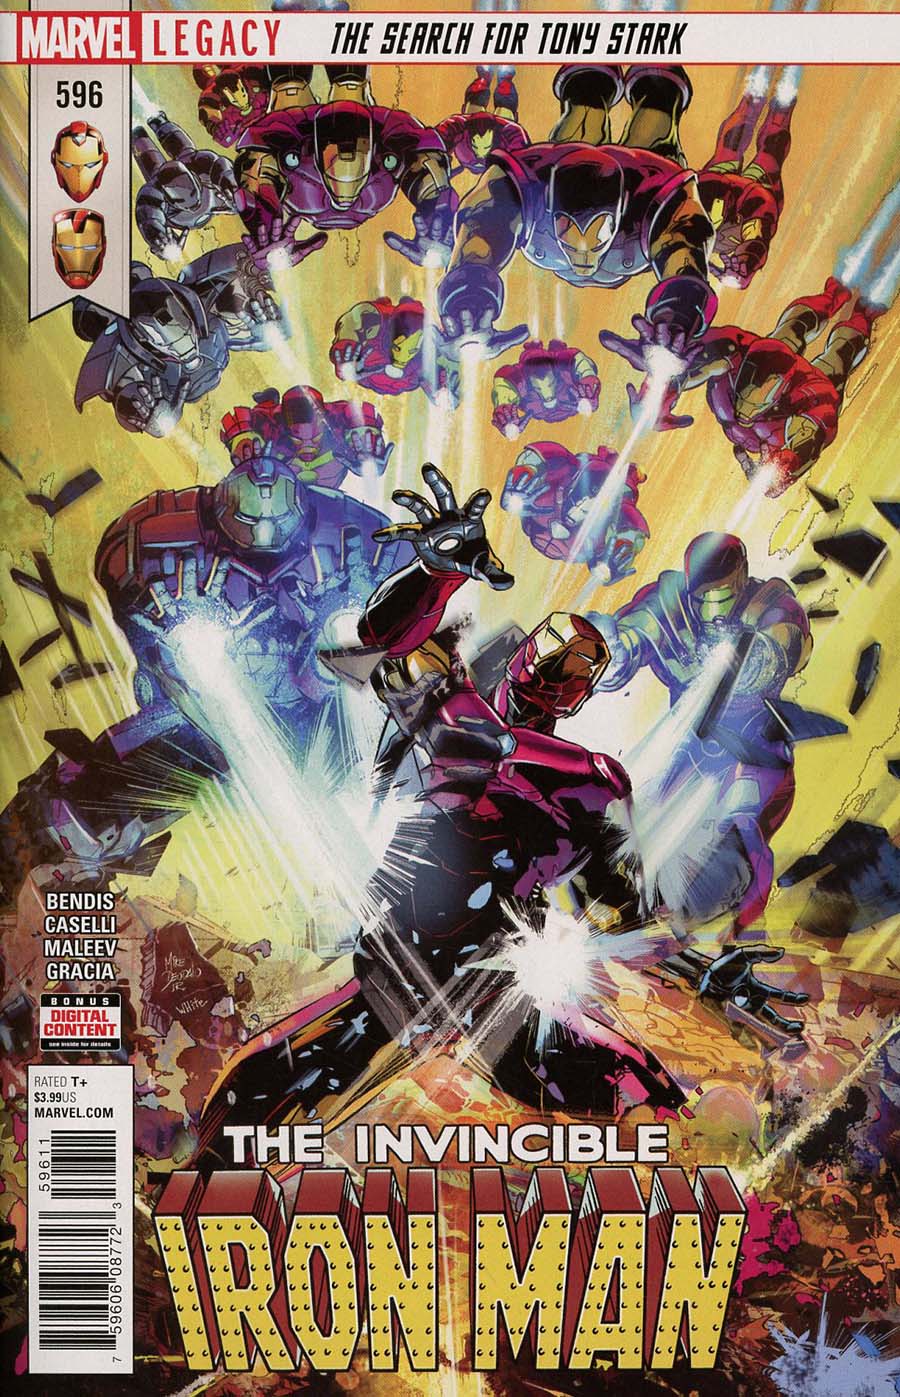 Invincible Iron Man Vol 3 #596 Cover A Regular Mike Deodato Jr Cover (Marvel Legacy Tie-In)